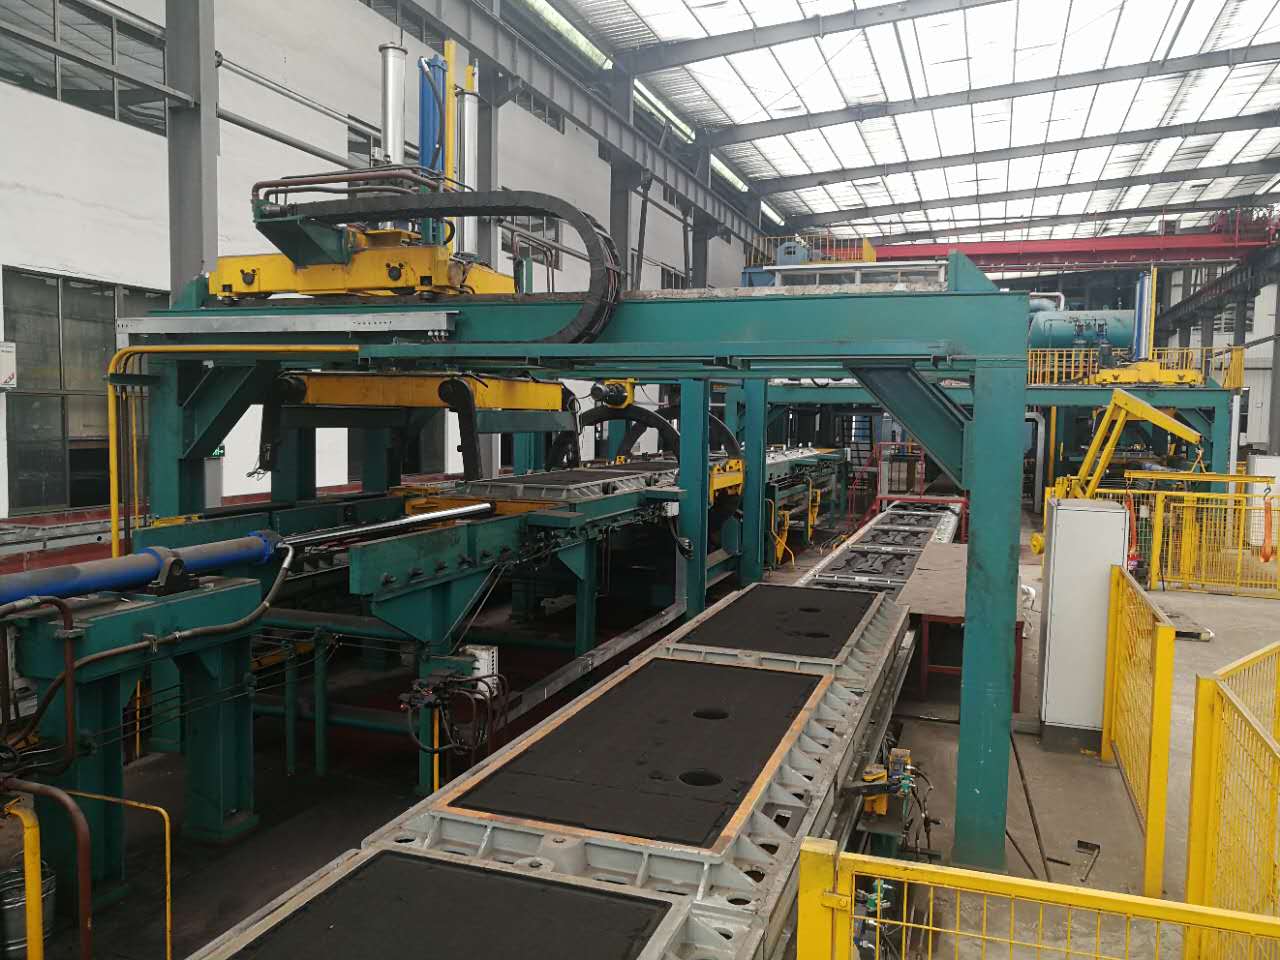 Automatic Molding line manufacturers greatly improve the speed and accuracy of diagnosi